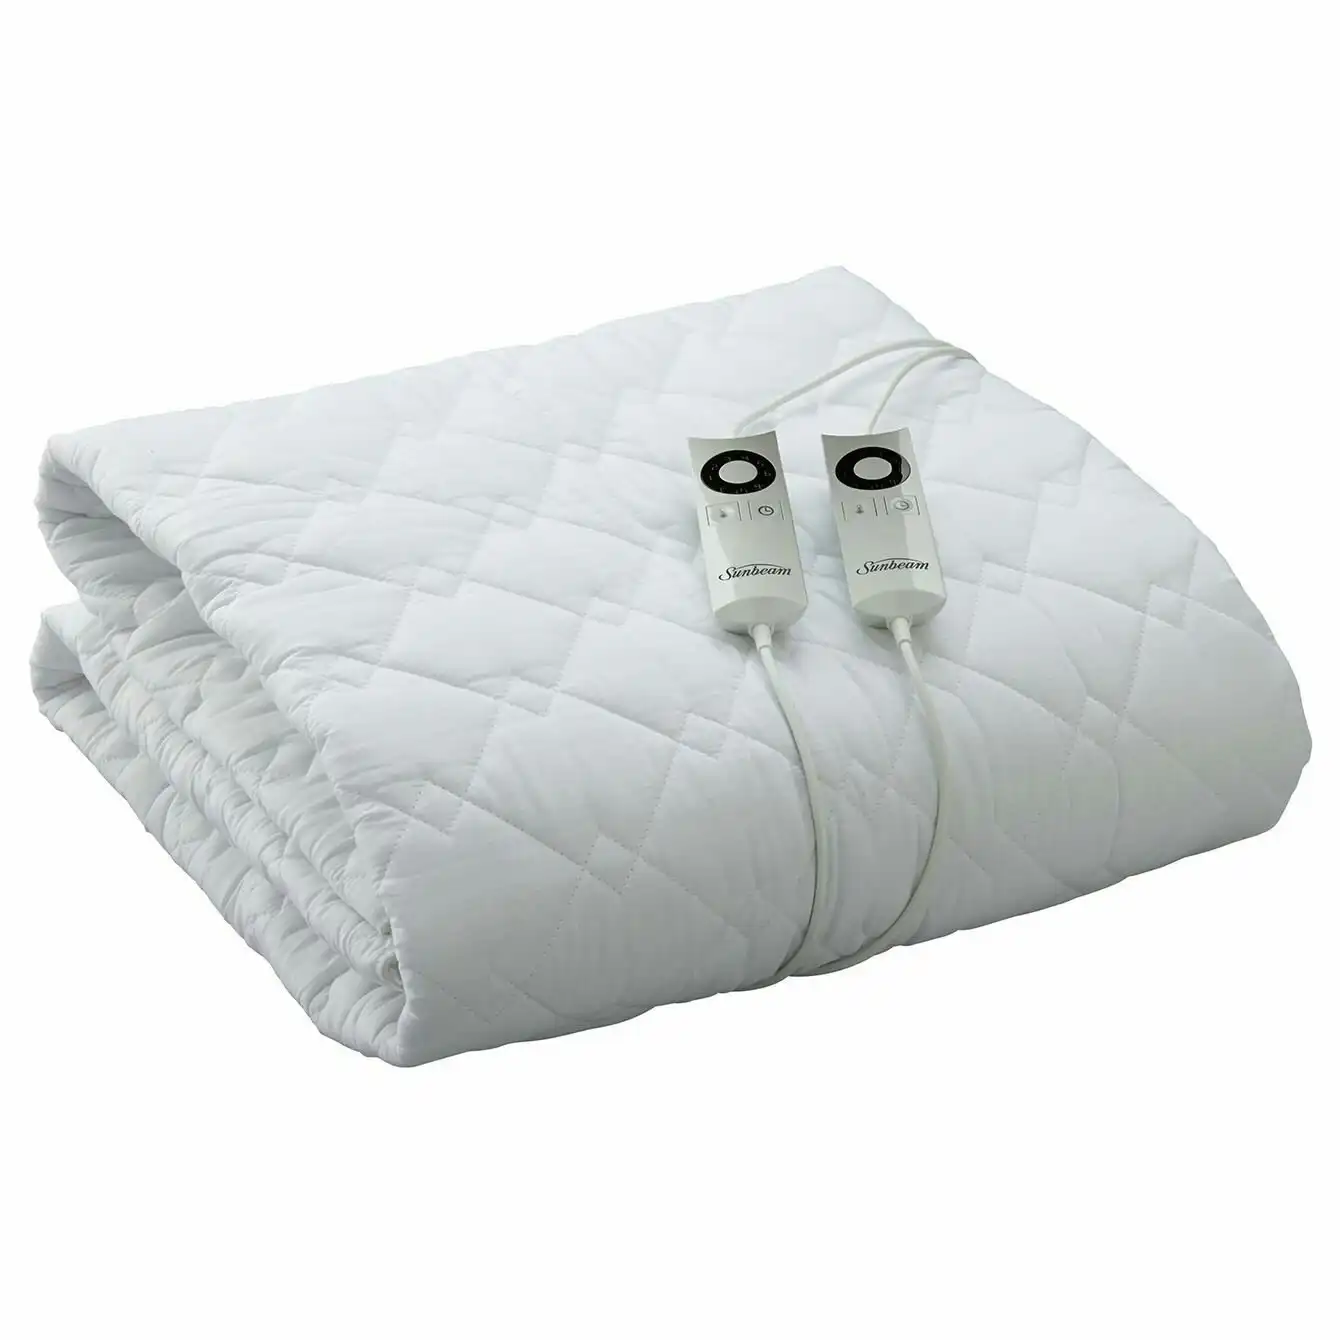 Sunbeam Sleep Perfect Quilted Electric Blanket Super King